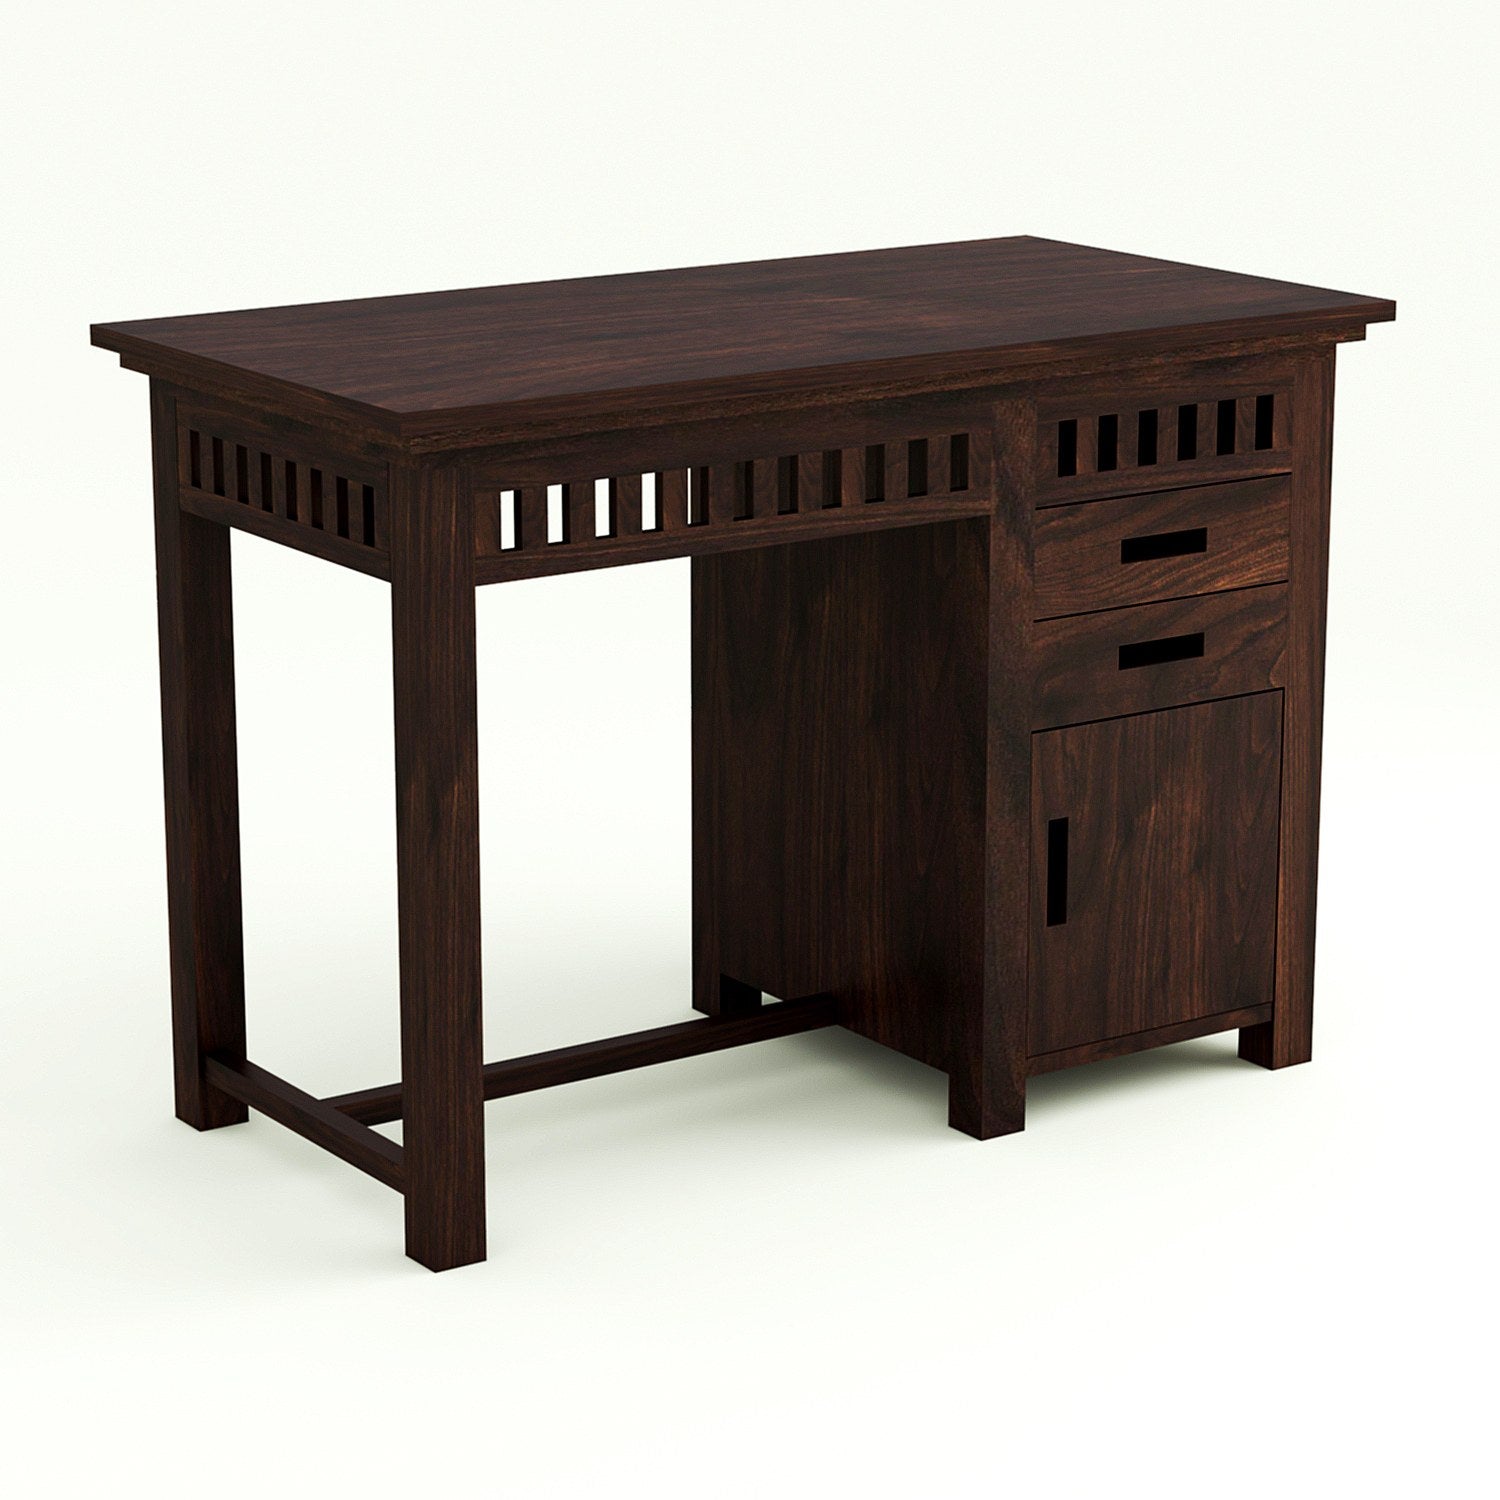 Amer Solid Wood Study Table For Home (Walnut Finish)